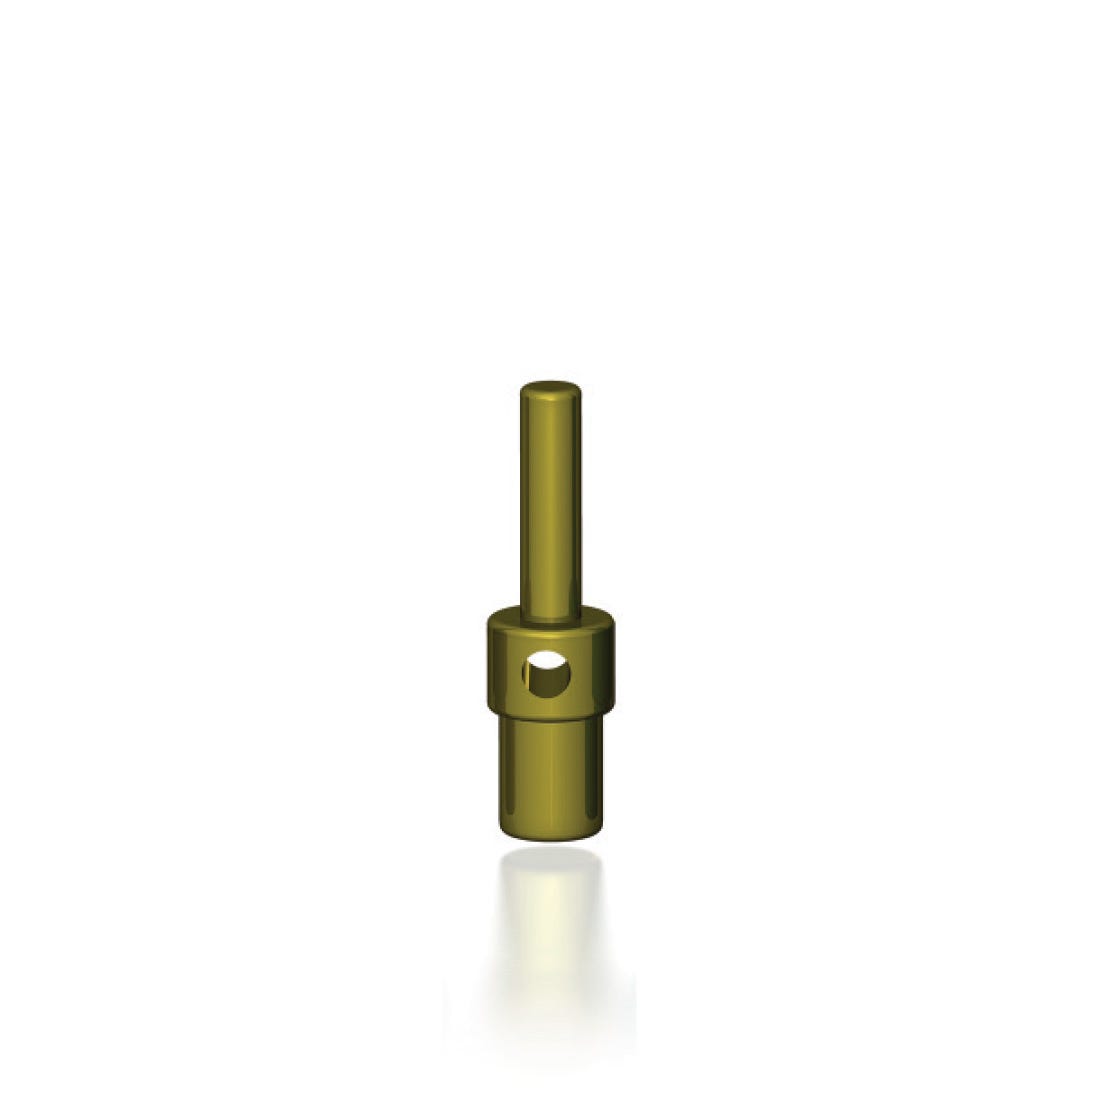 4.3mm PARALLELING PIN